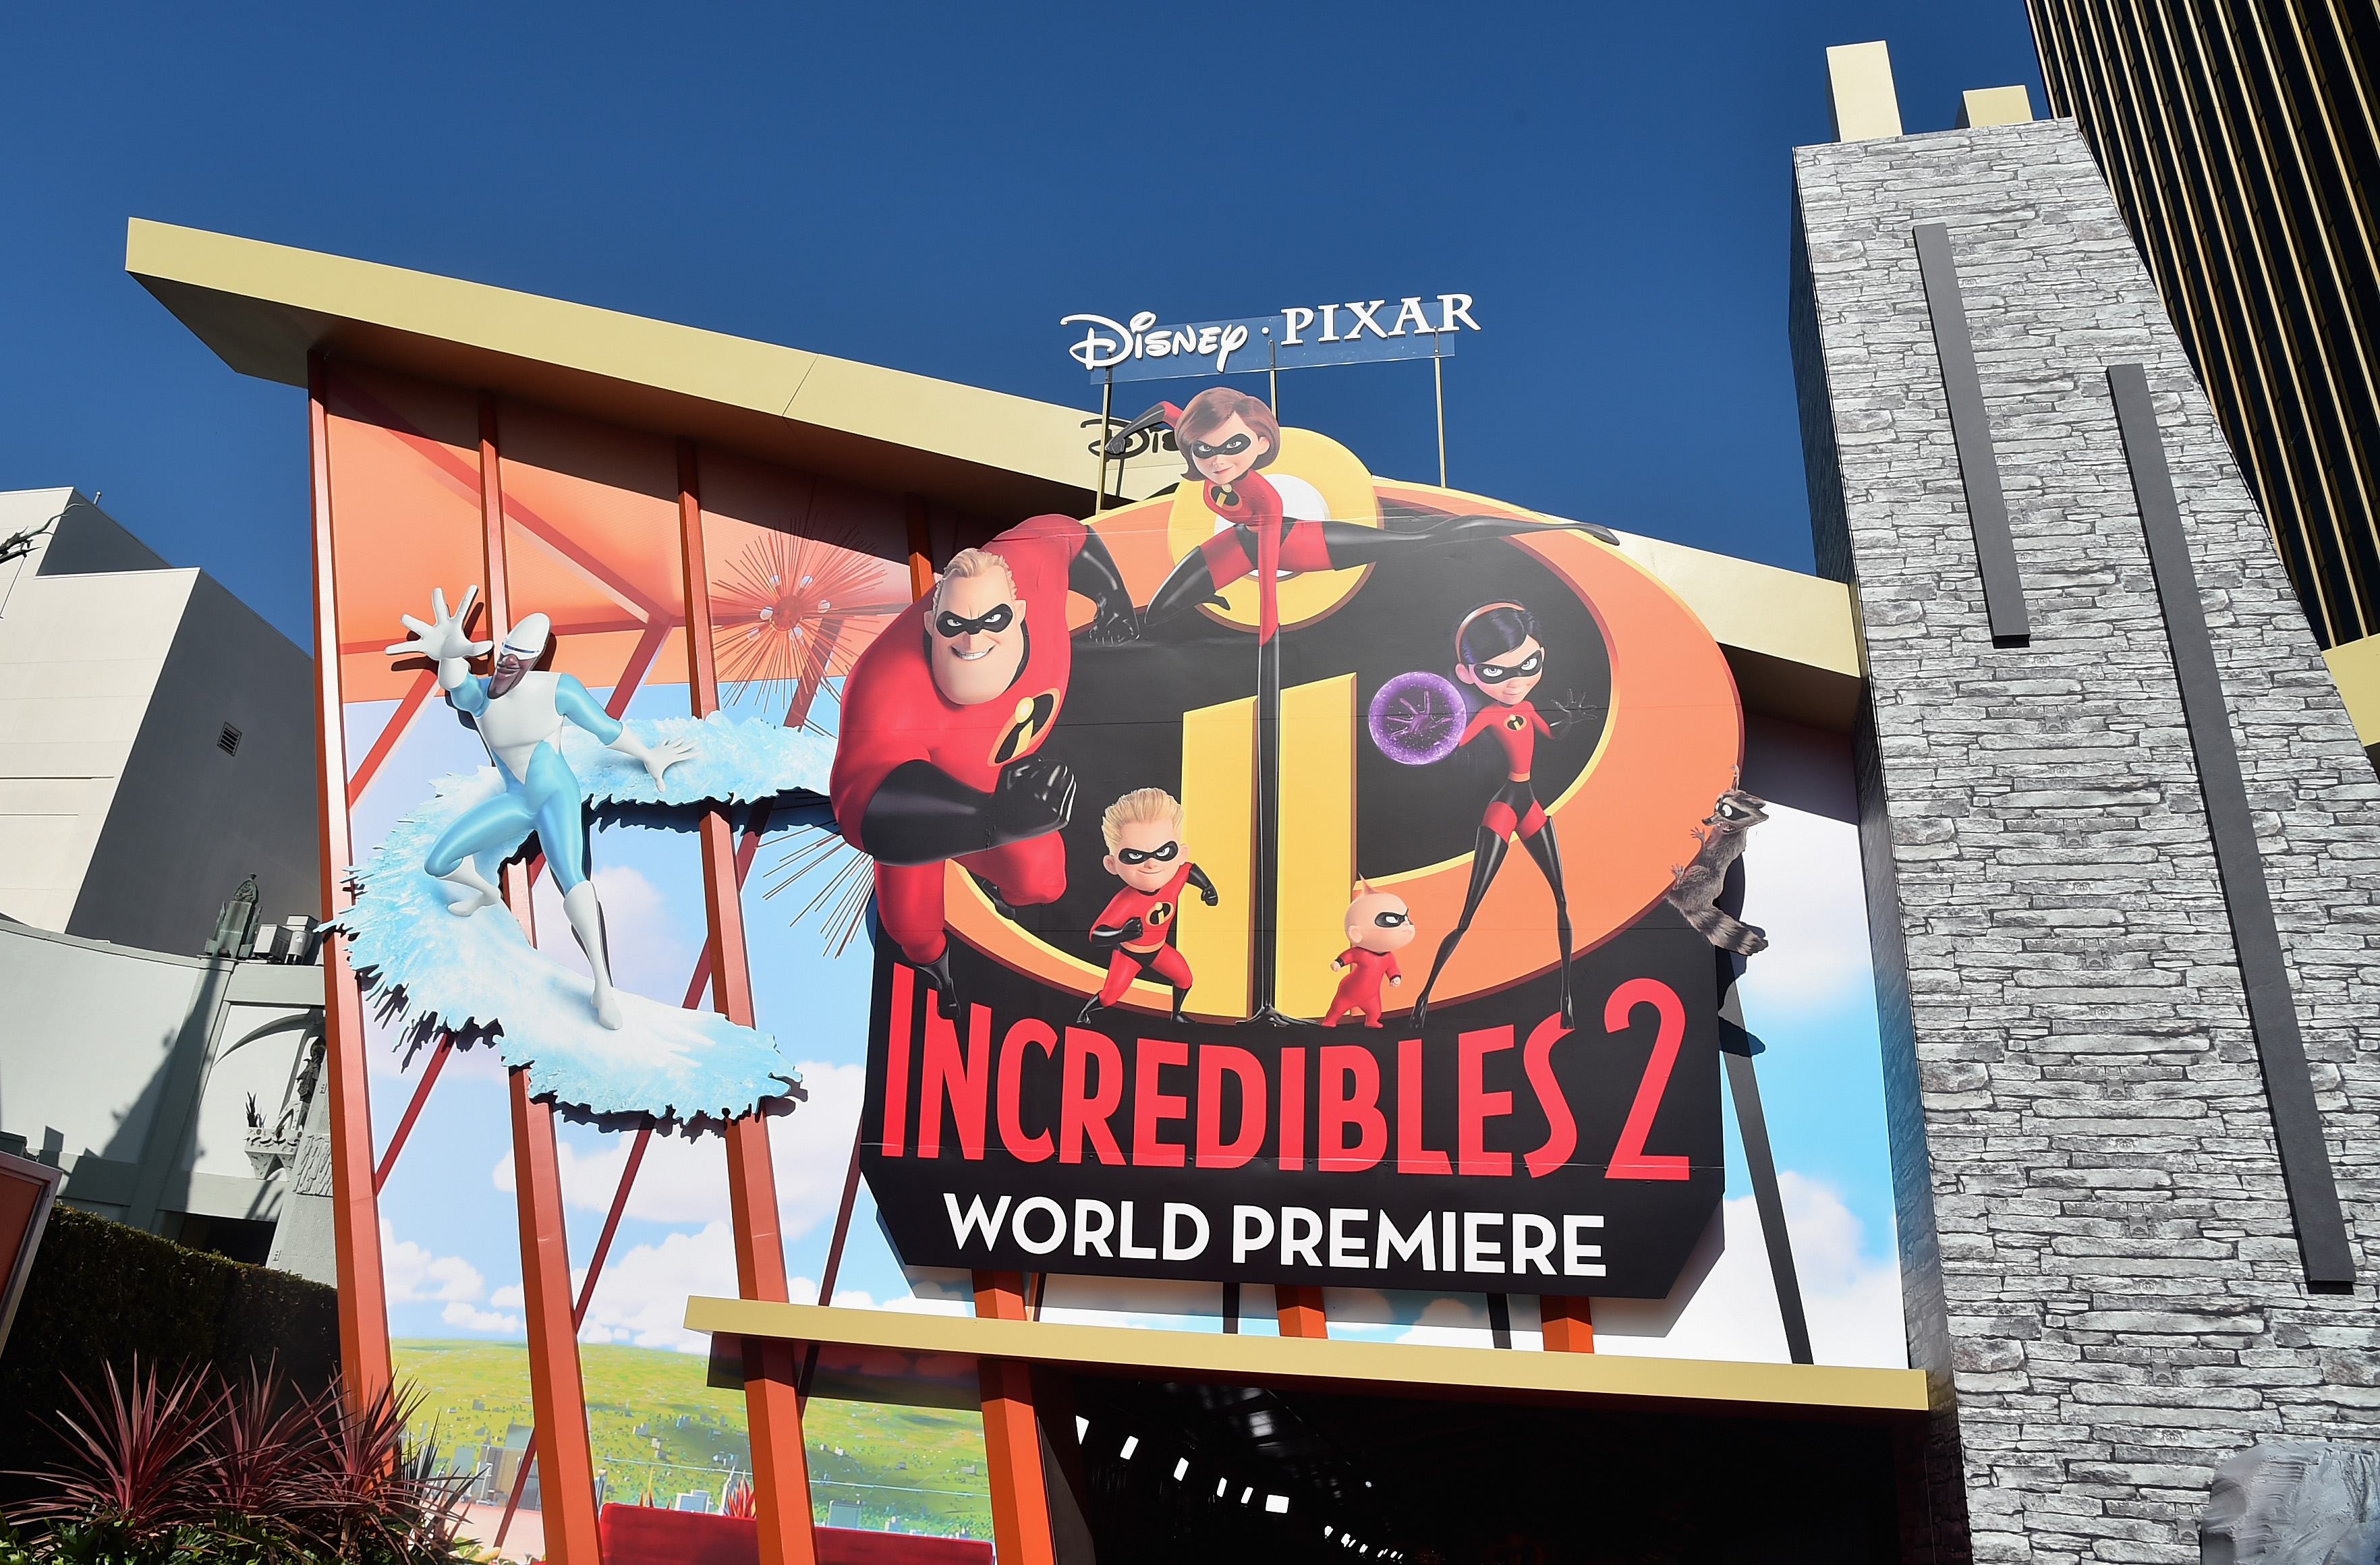 The Incredibles 2 premiere